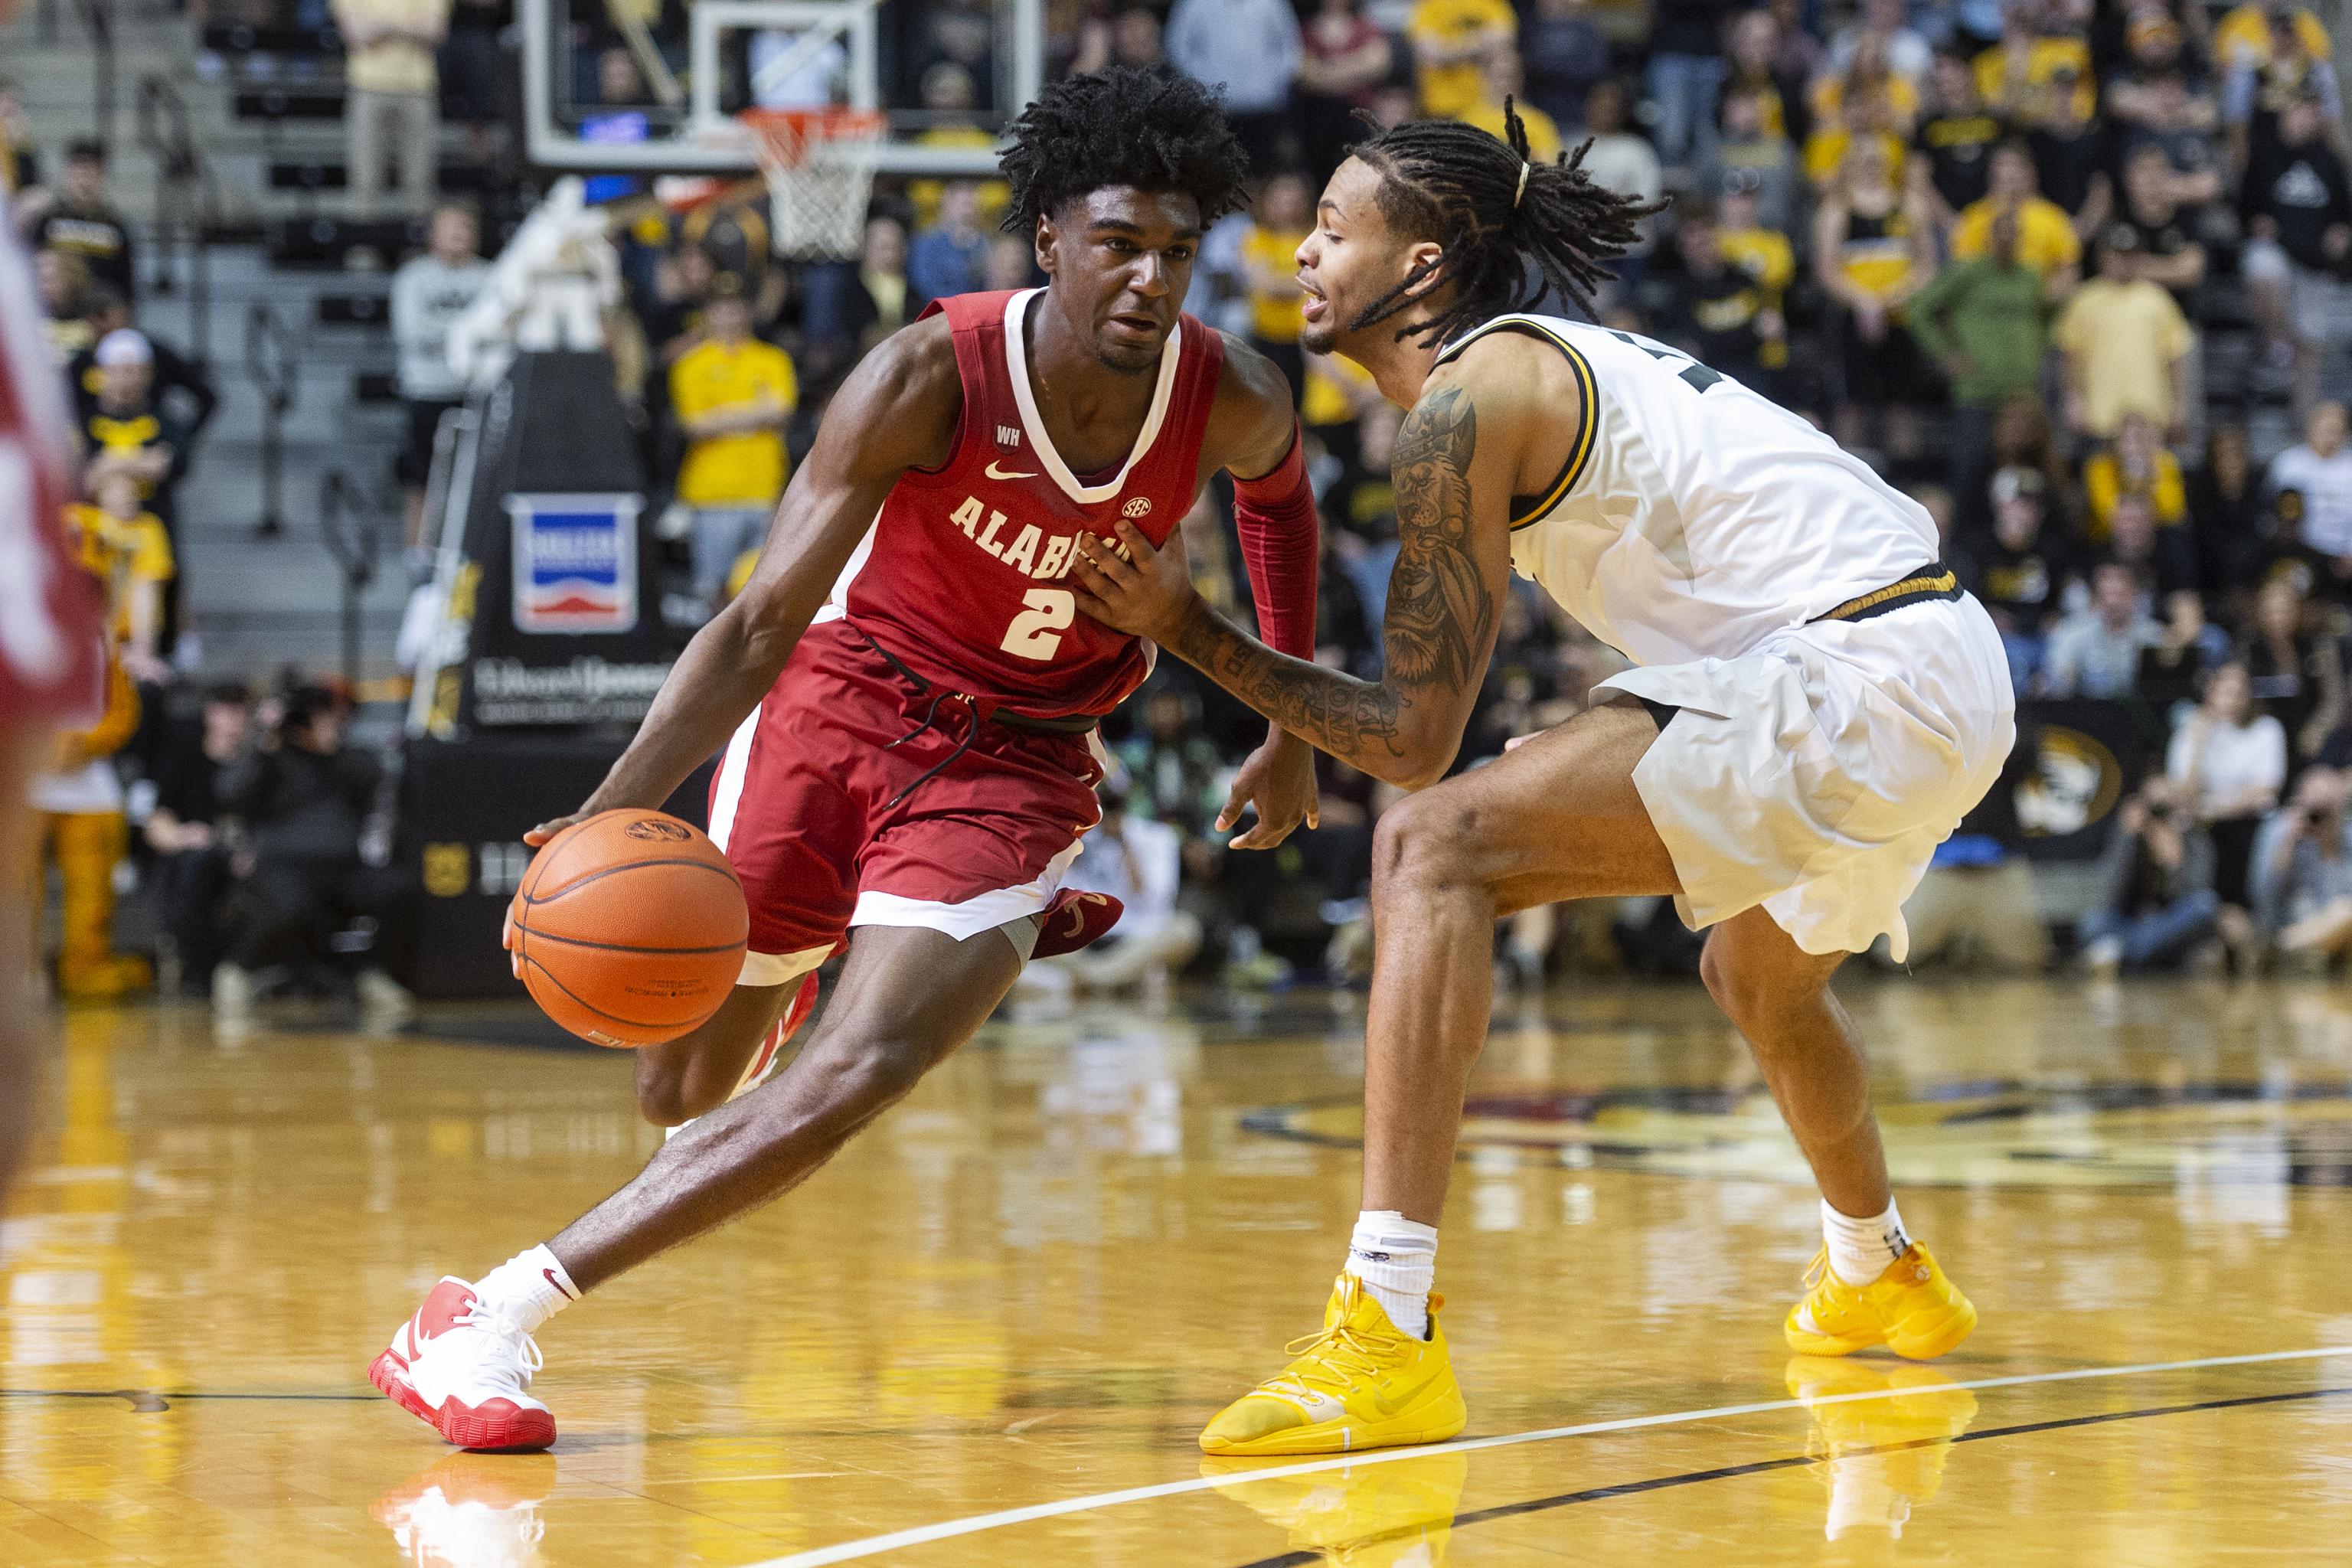 Kira Lewis Jr.: 3 things to know about the Alabama basketball star